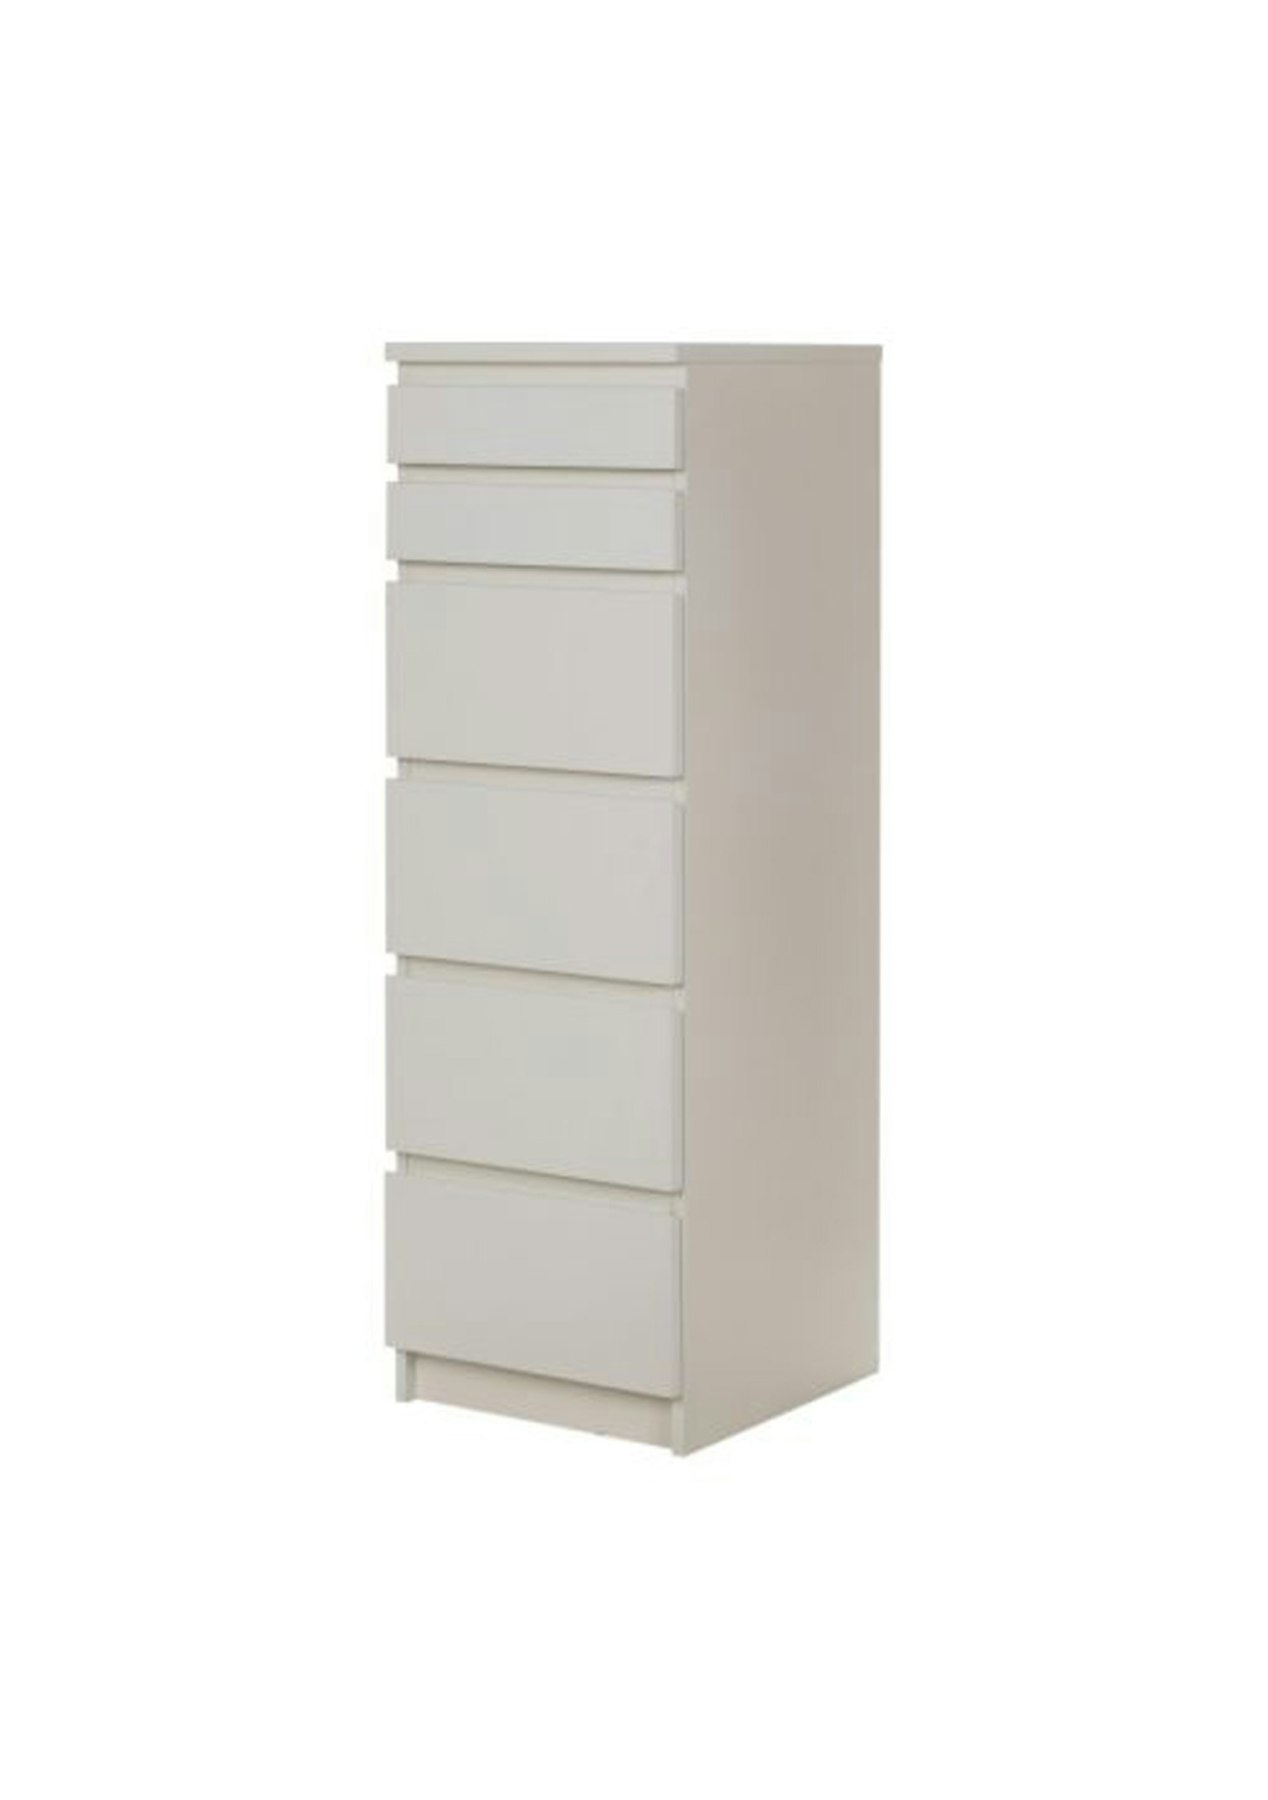 Ikea Malm Chest Of 6 Drawers 40x123cm White Mirror Glass